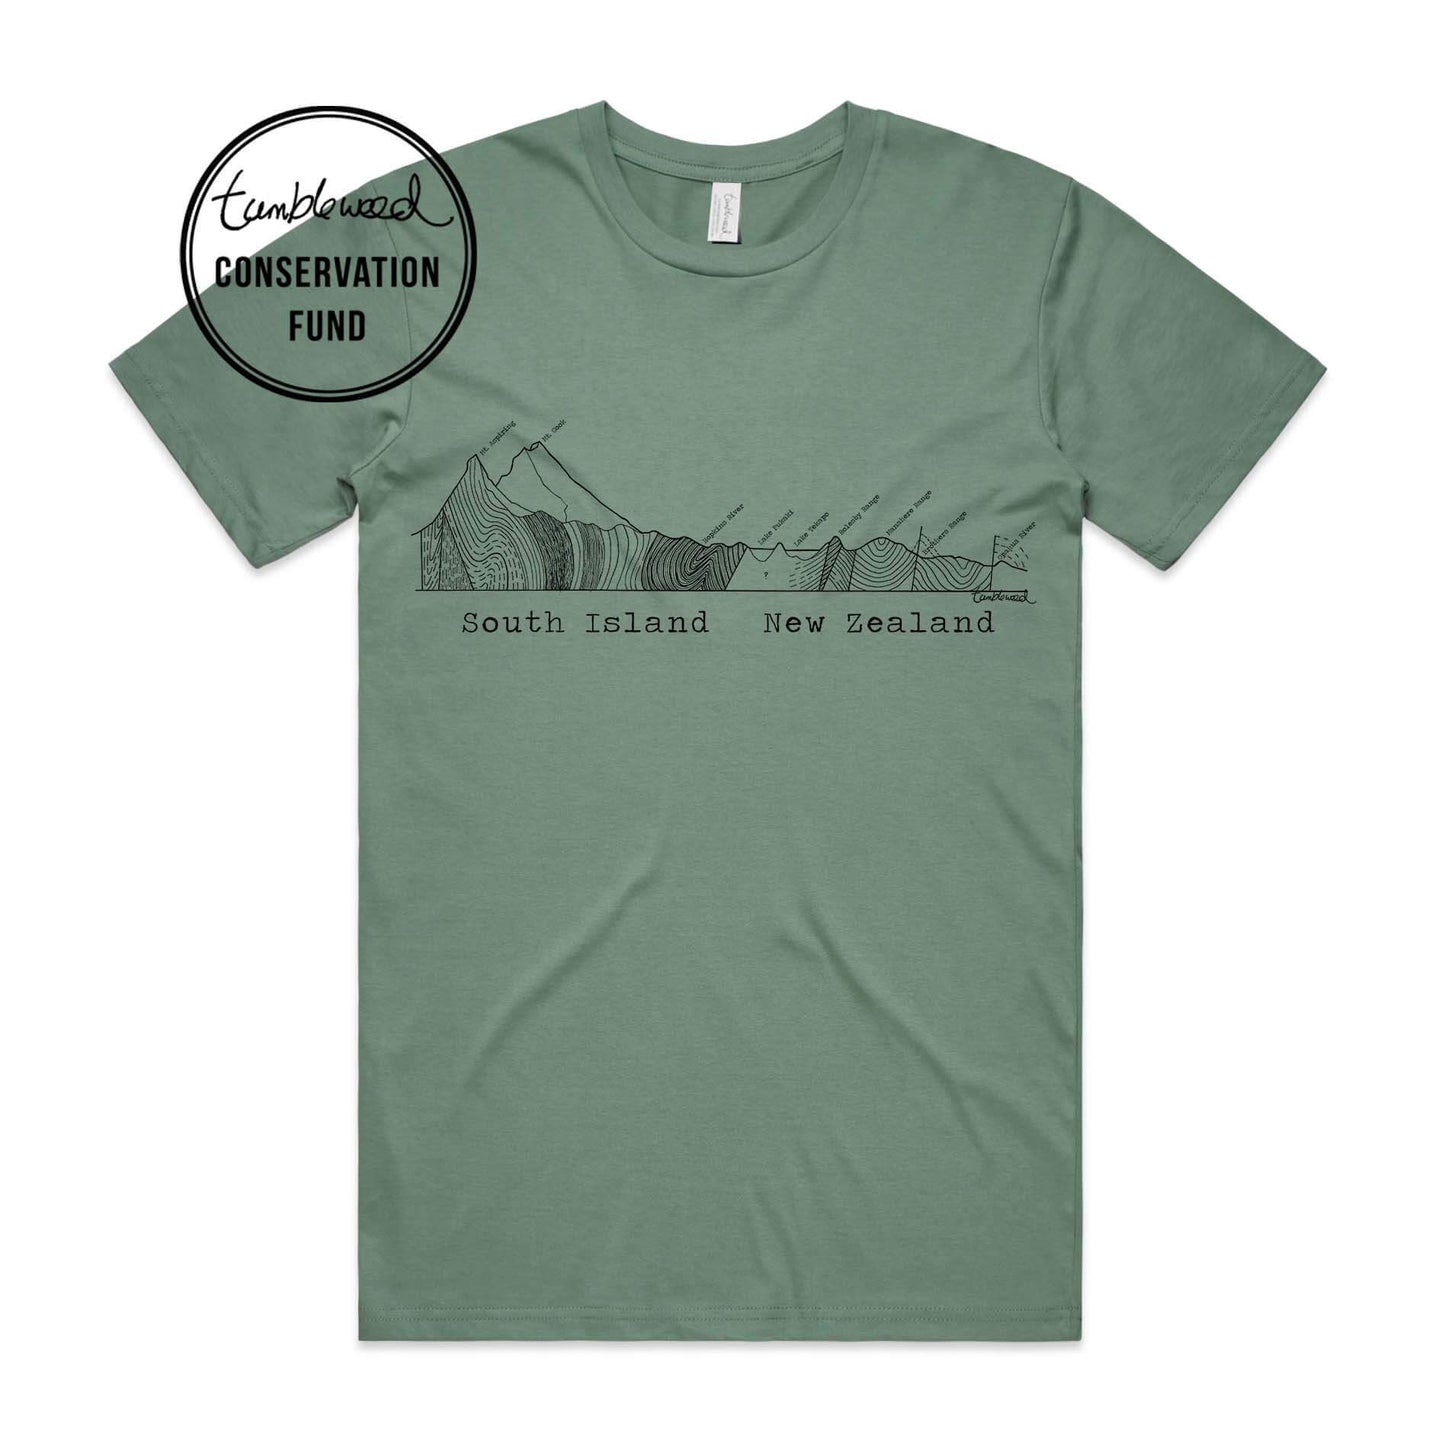 Grey marle, female t-shirt featuring a screen printed South Island Cross Section design.